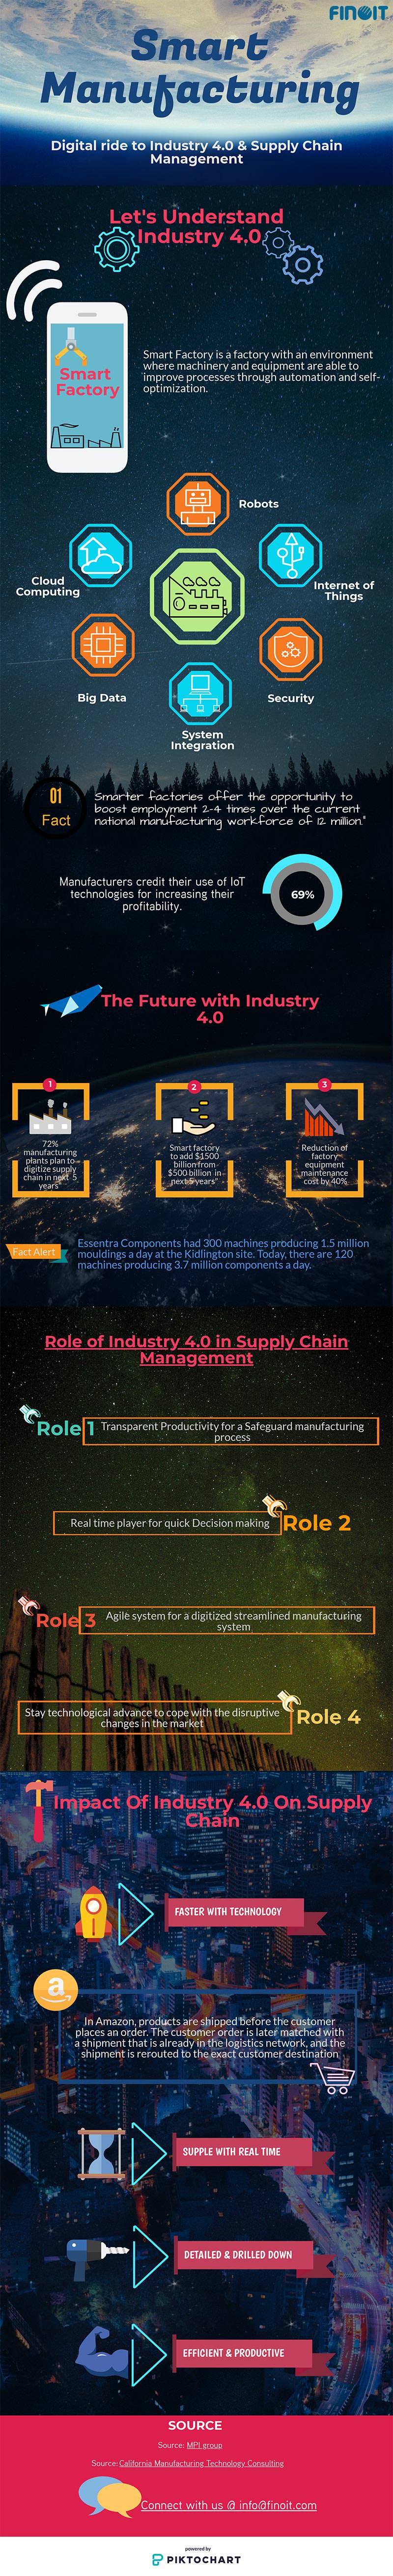 smart manufacturing infographic